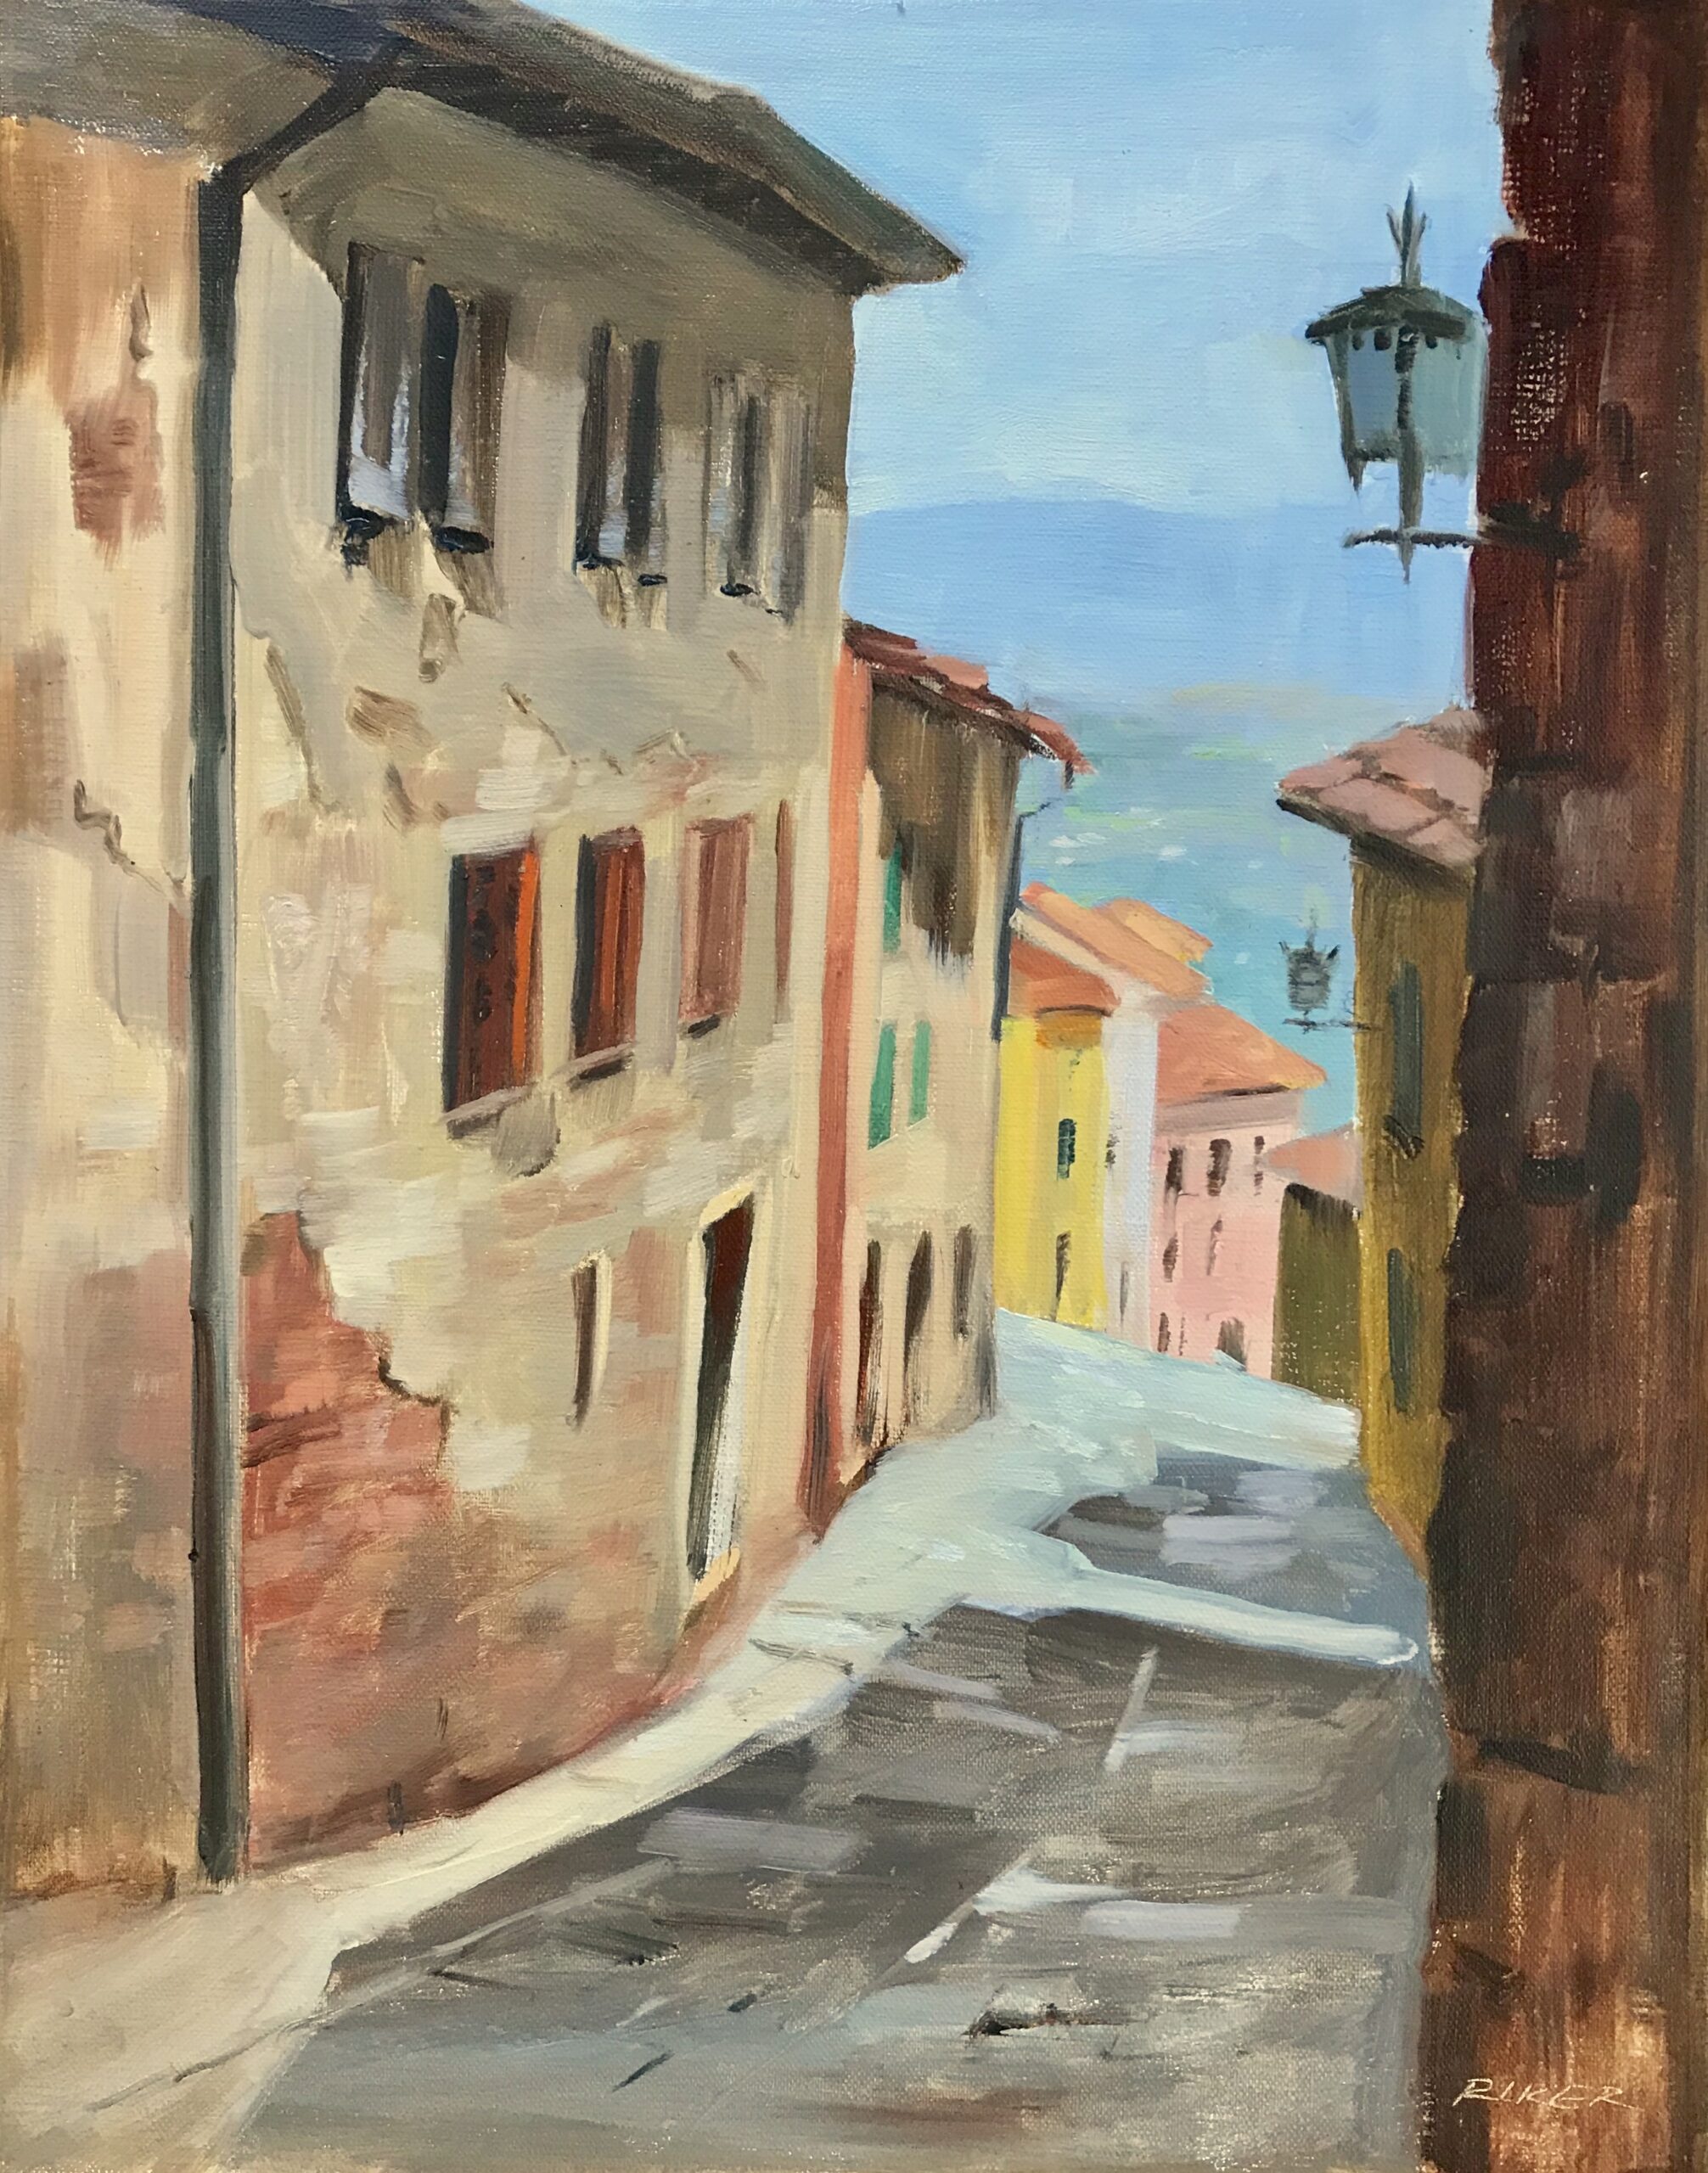 Julie Riker, “Looking Down, Montepulciano,” 2019, oil, 14 x 11 in., Private collection, Plein air